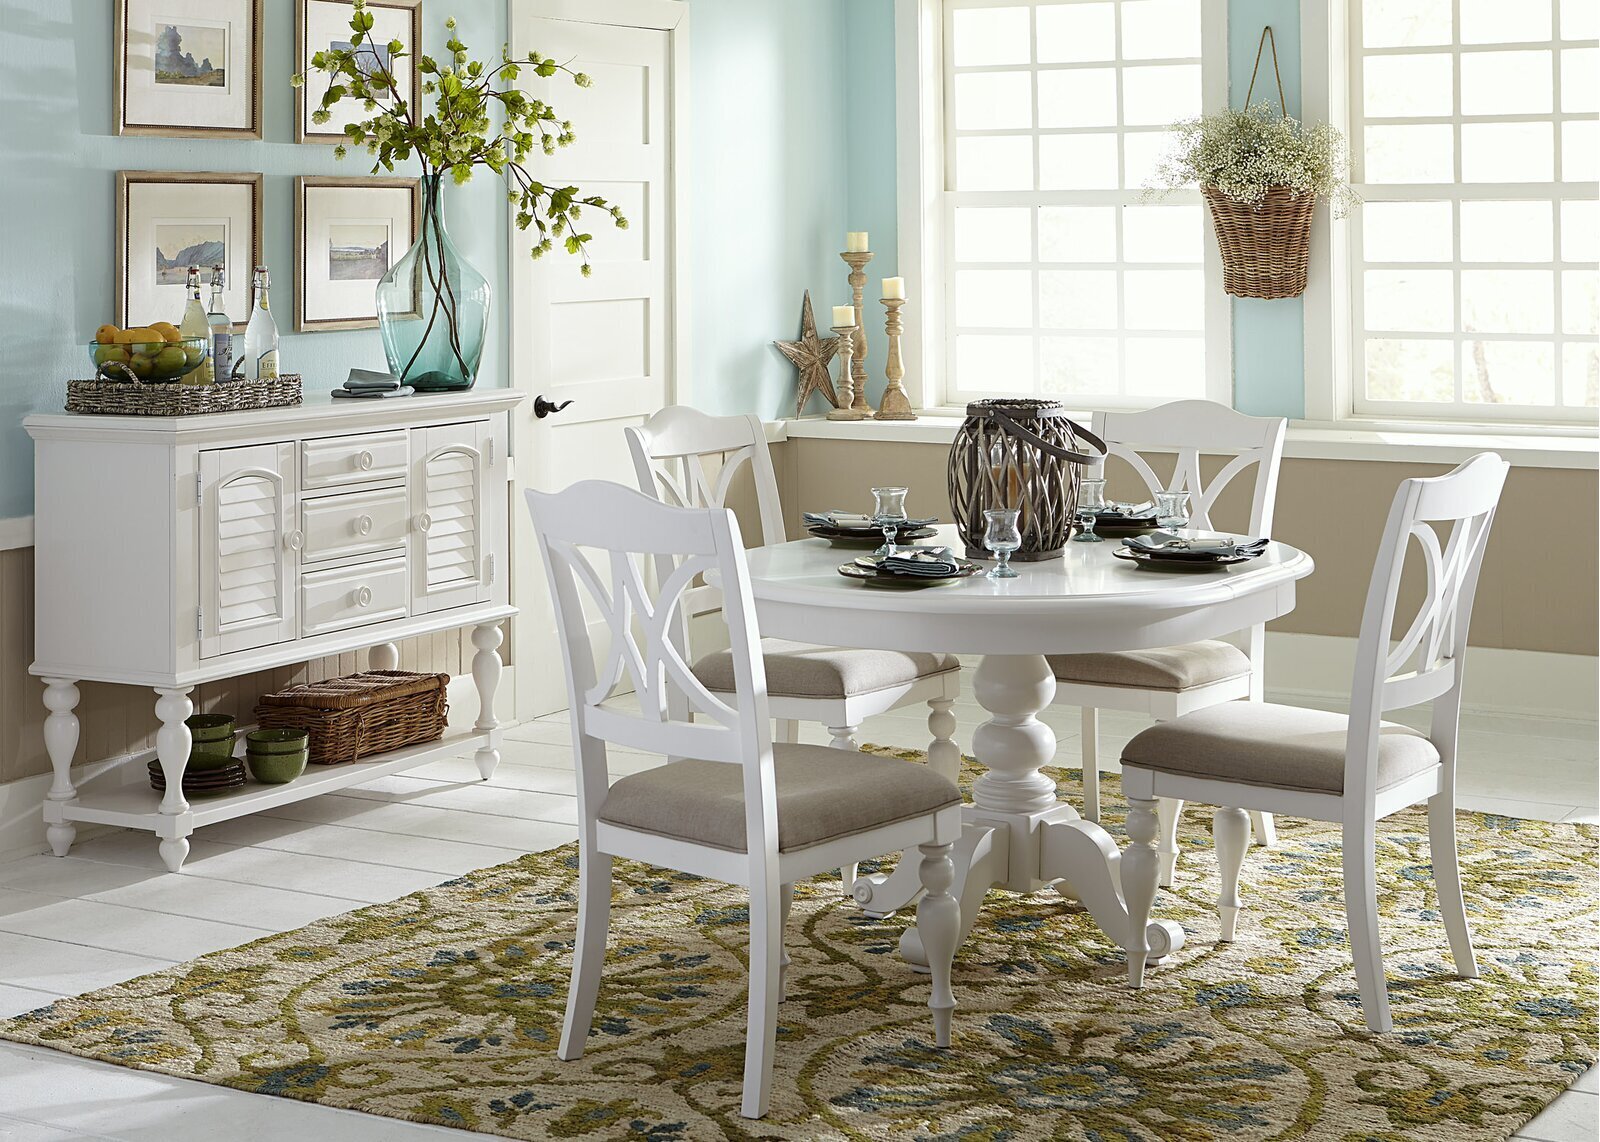 Ornate french country kitchen table with removable leaf